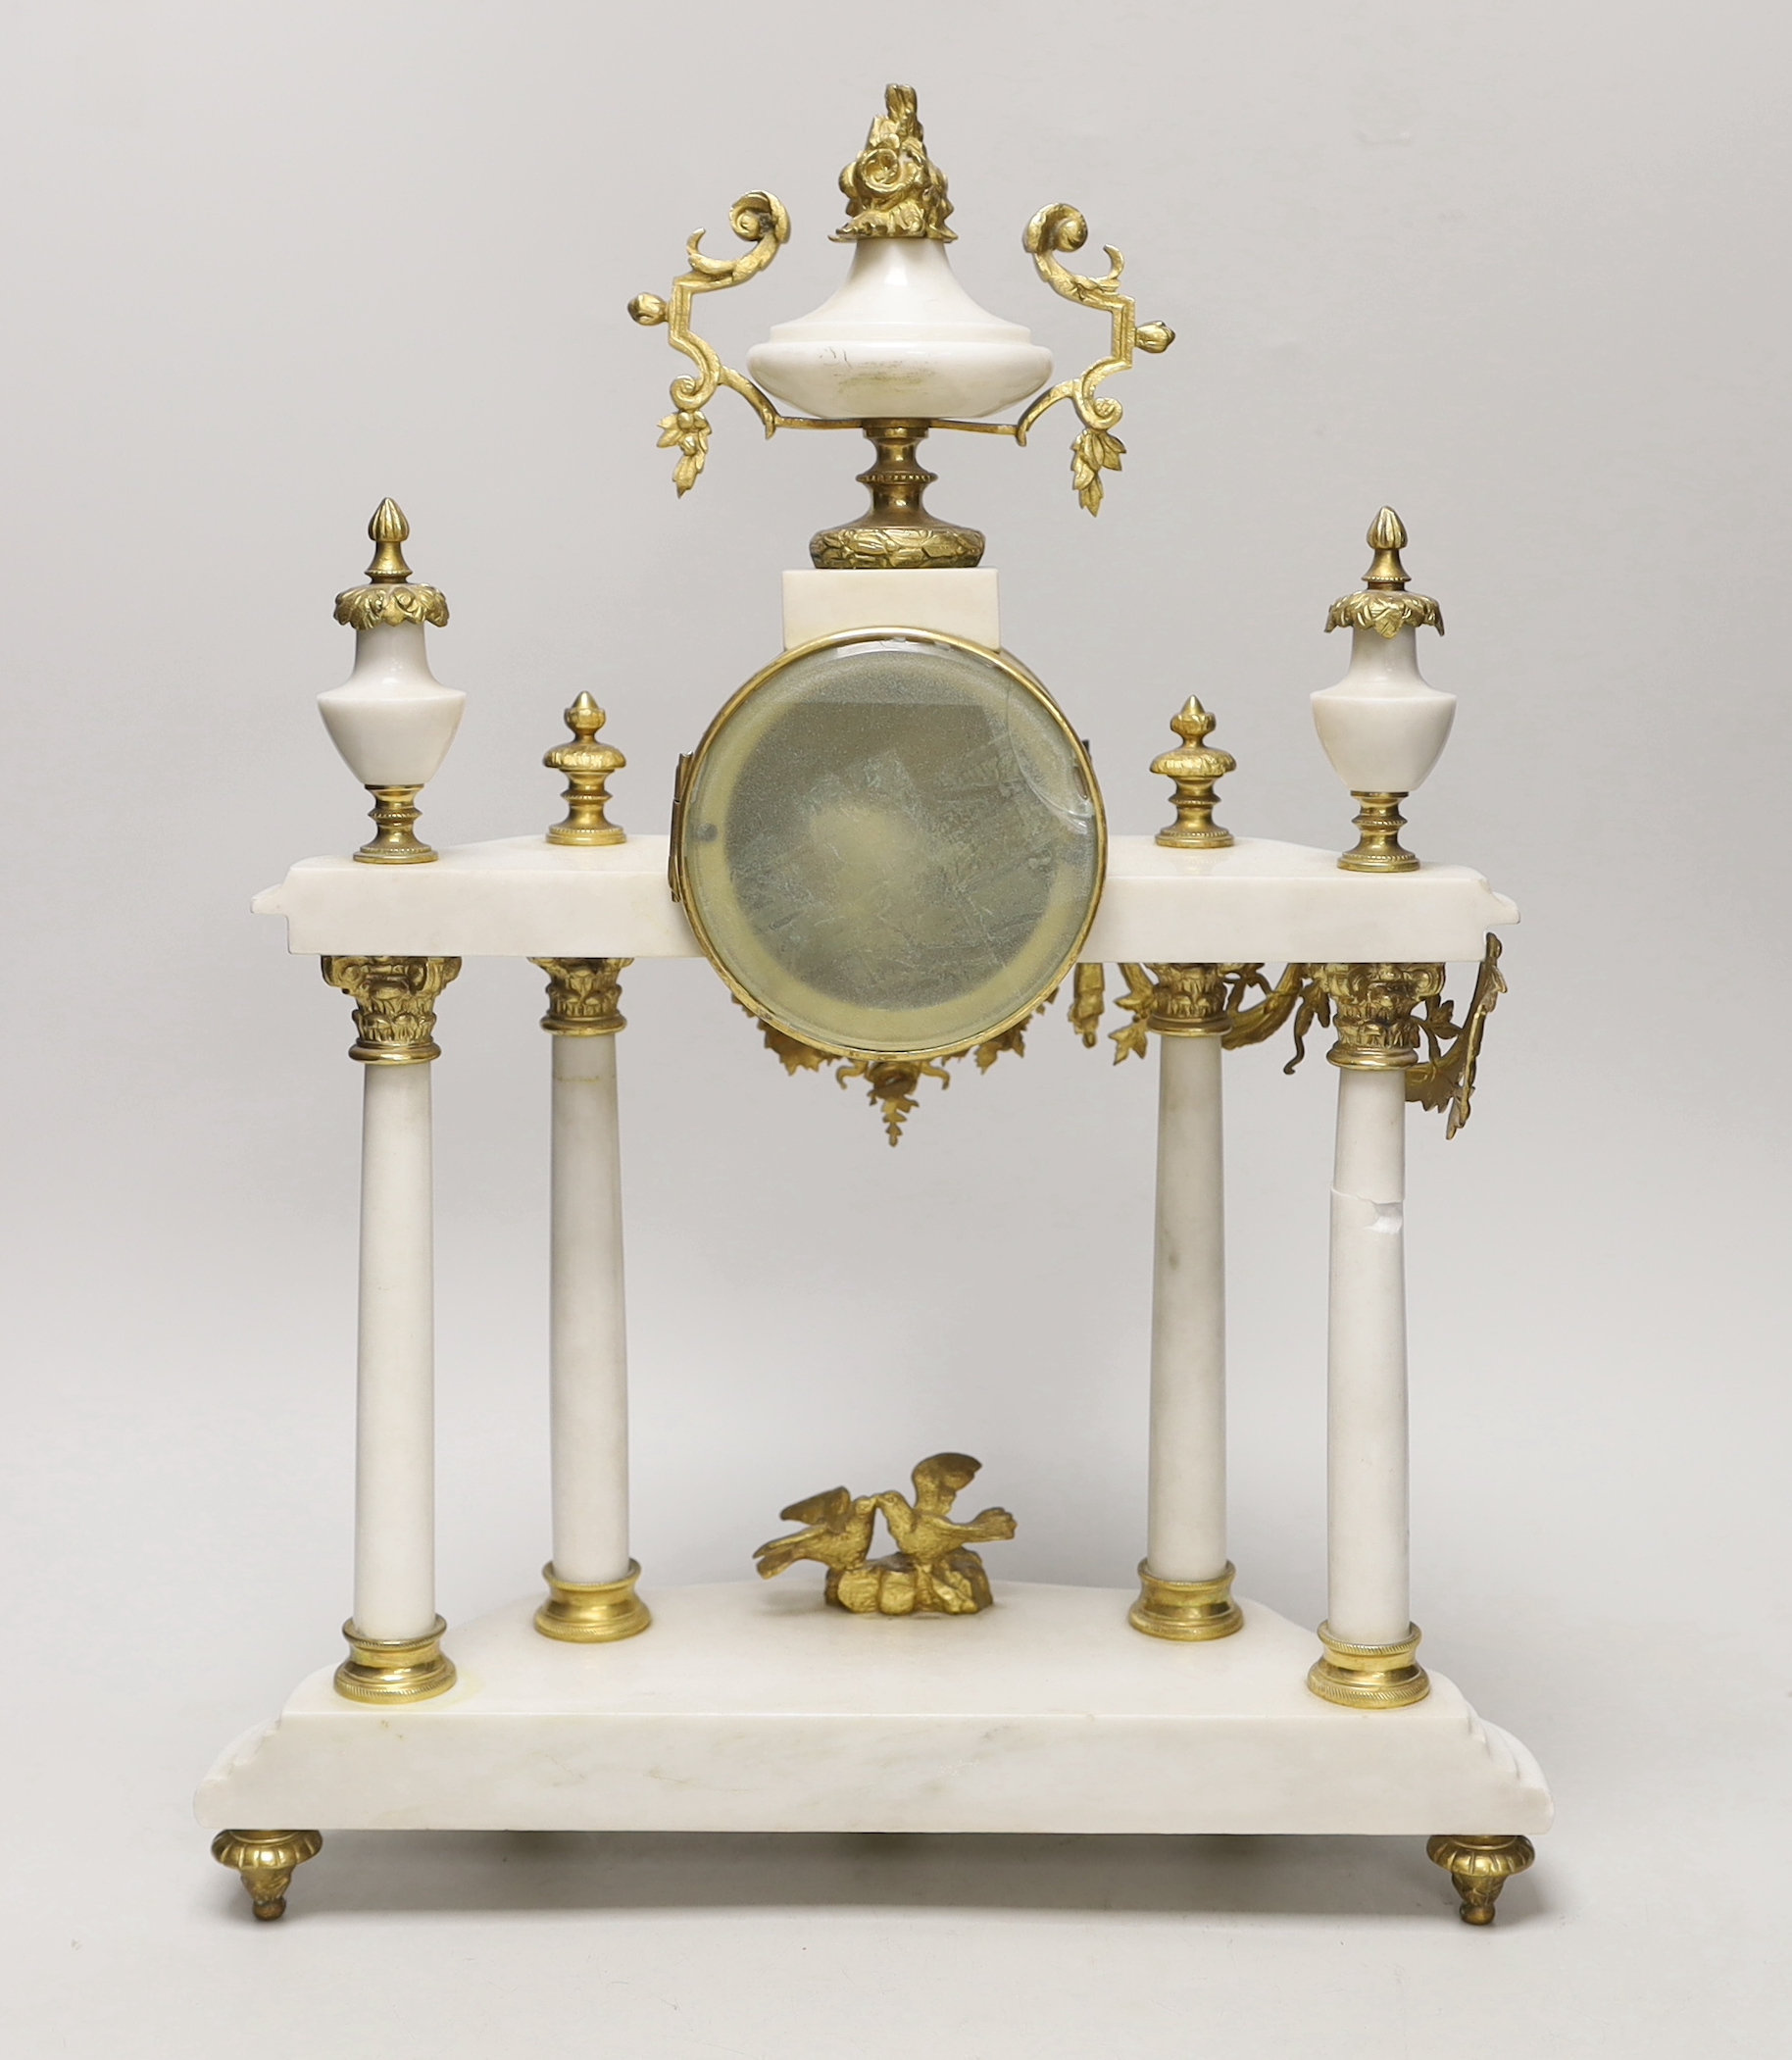 A 19th century French white marble mantel clock, 42cm